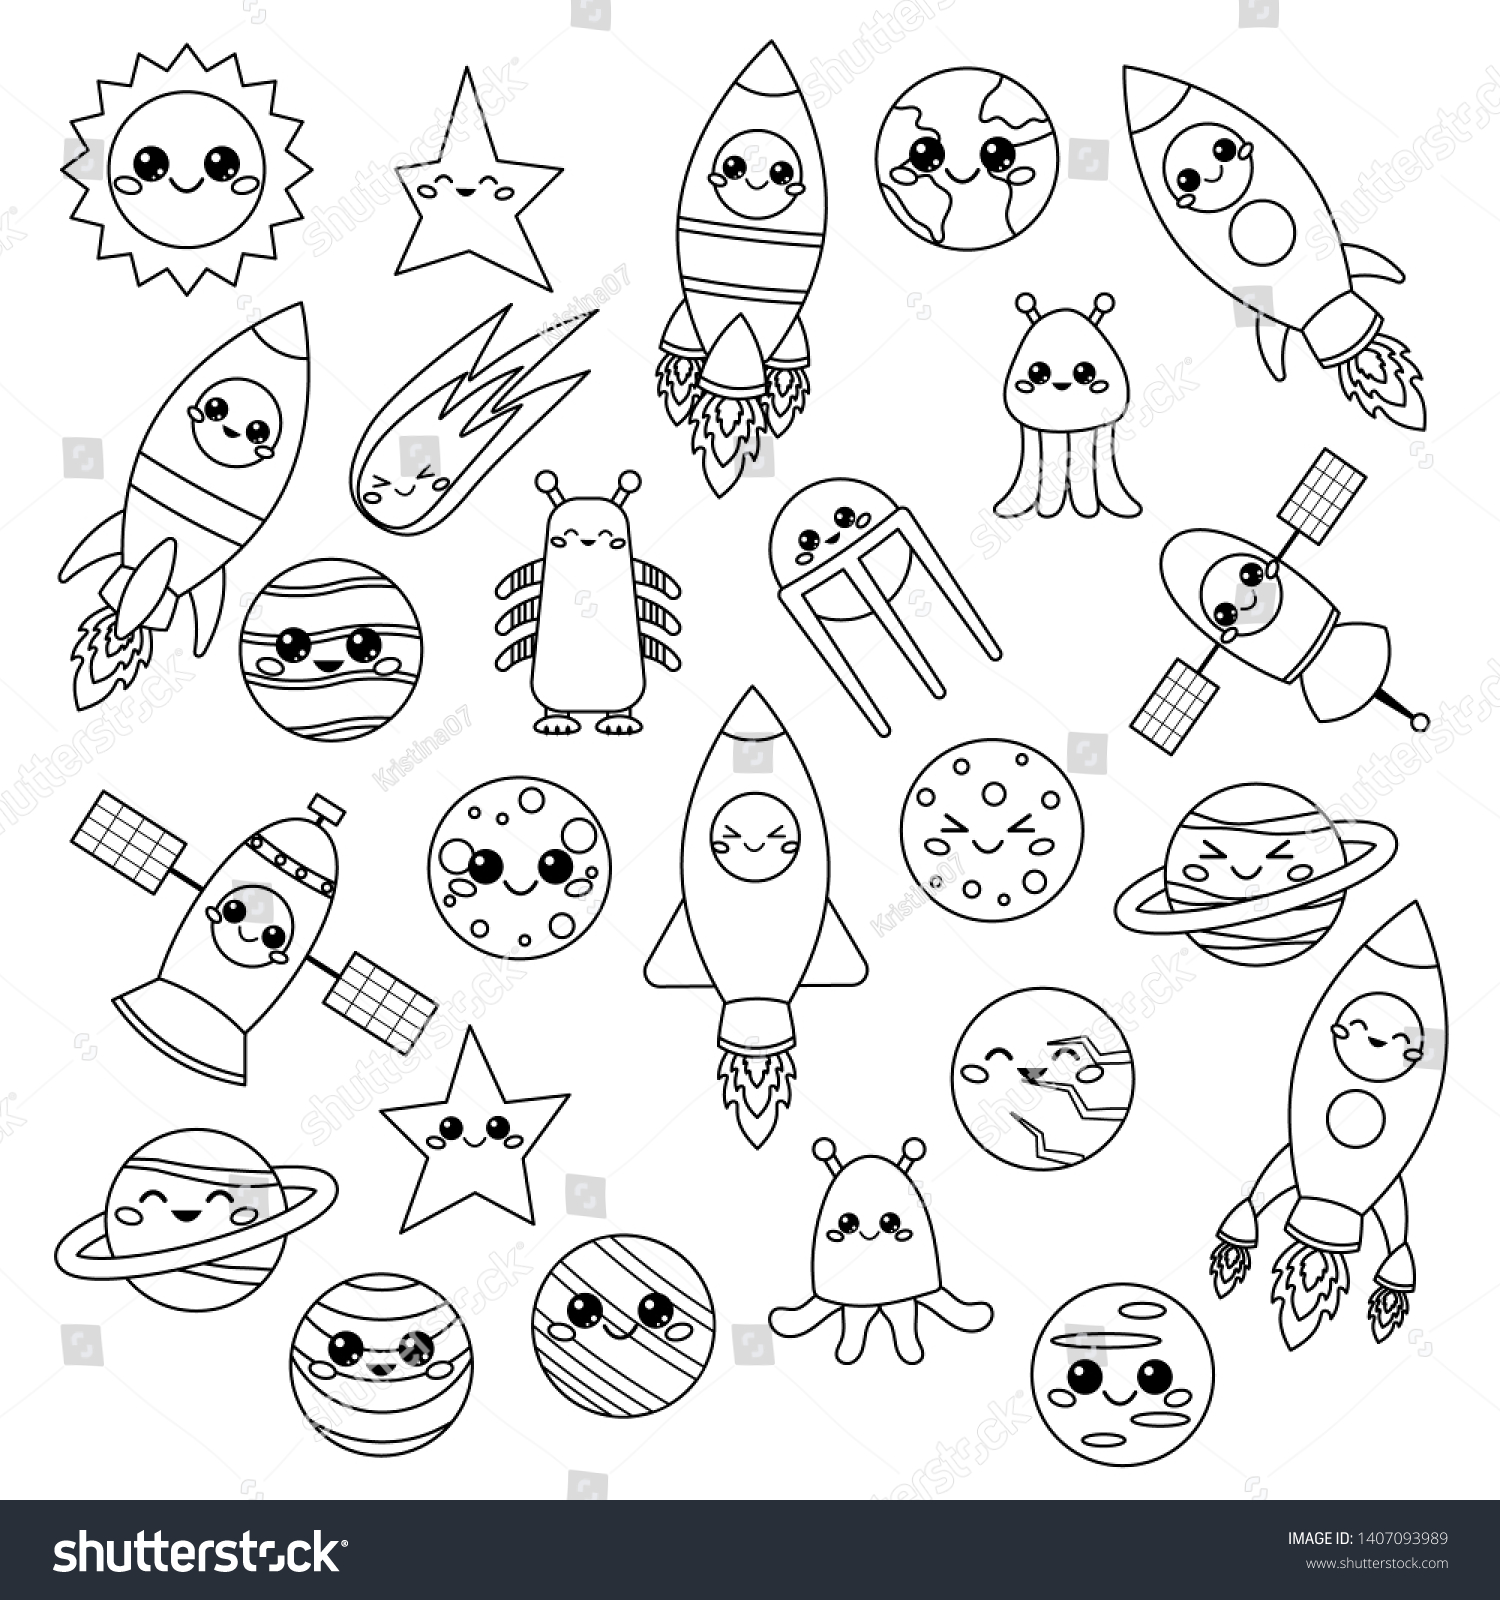 Download Kawaii Coloring Pages For Kids Cute Drawing With Crayons